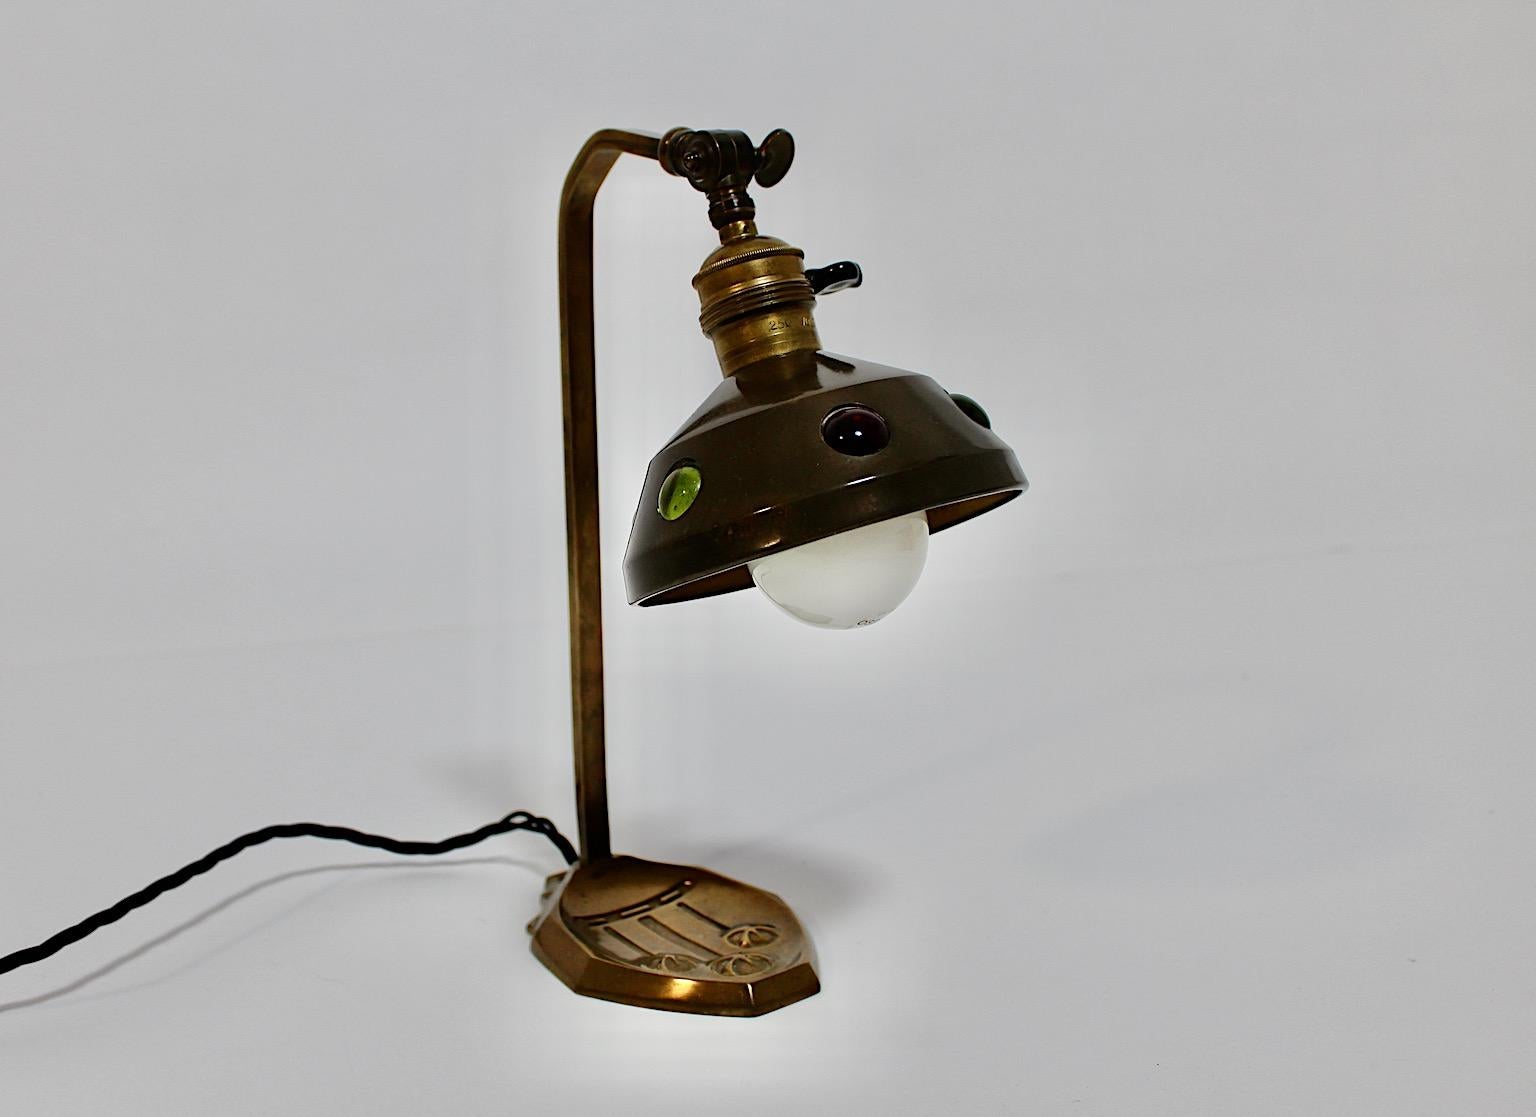 Jugendstil vintage table lamp from brass and multicolored decor stones circa 1910 Austria.
A beautiful table lamp from brass with six stunning multicolored decor stones semi bowl like at the shade.
This table lamp is rewired with a black cable and